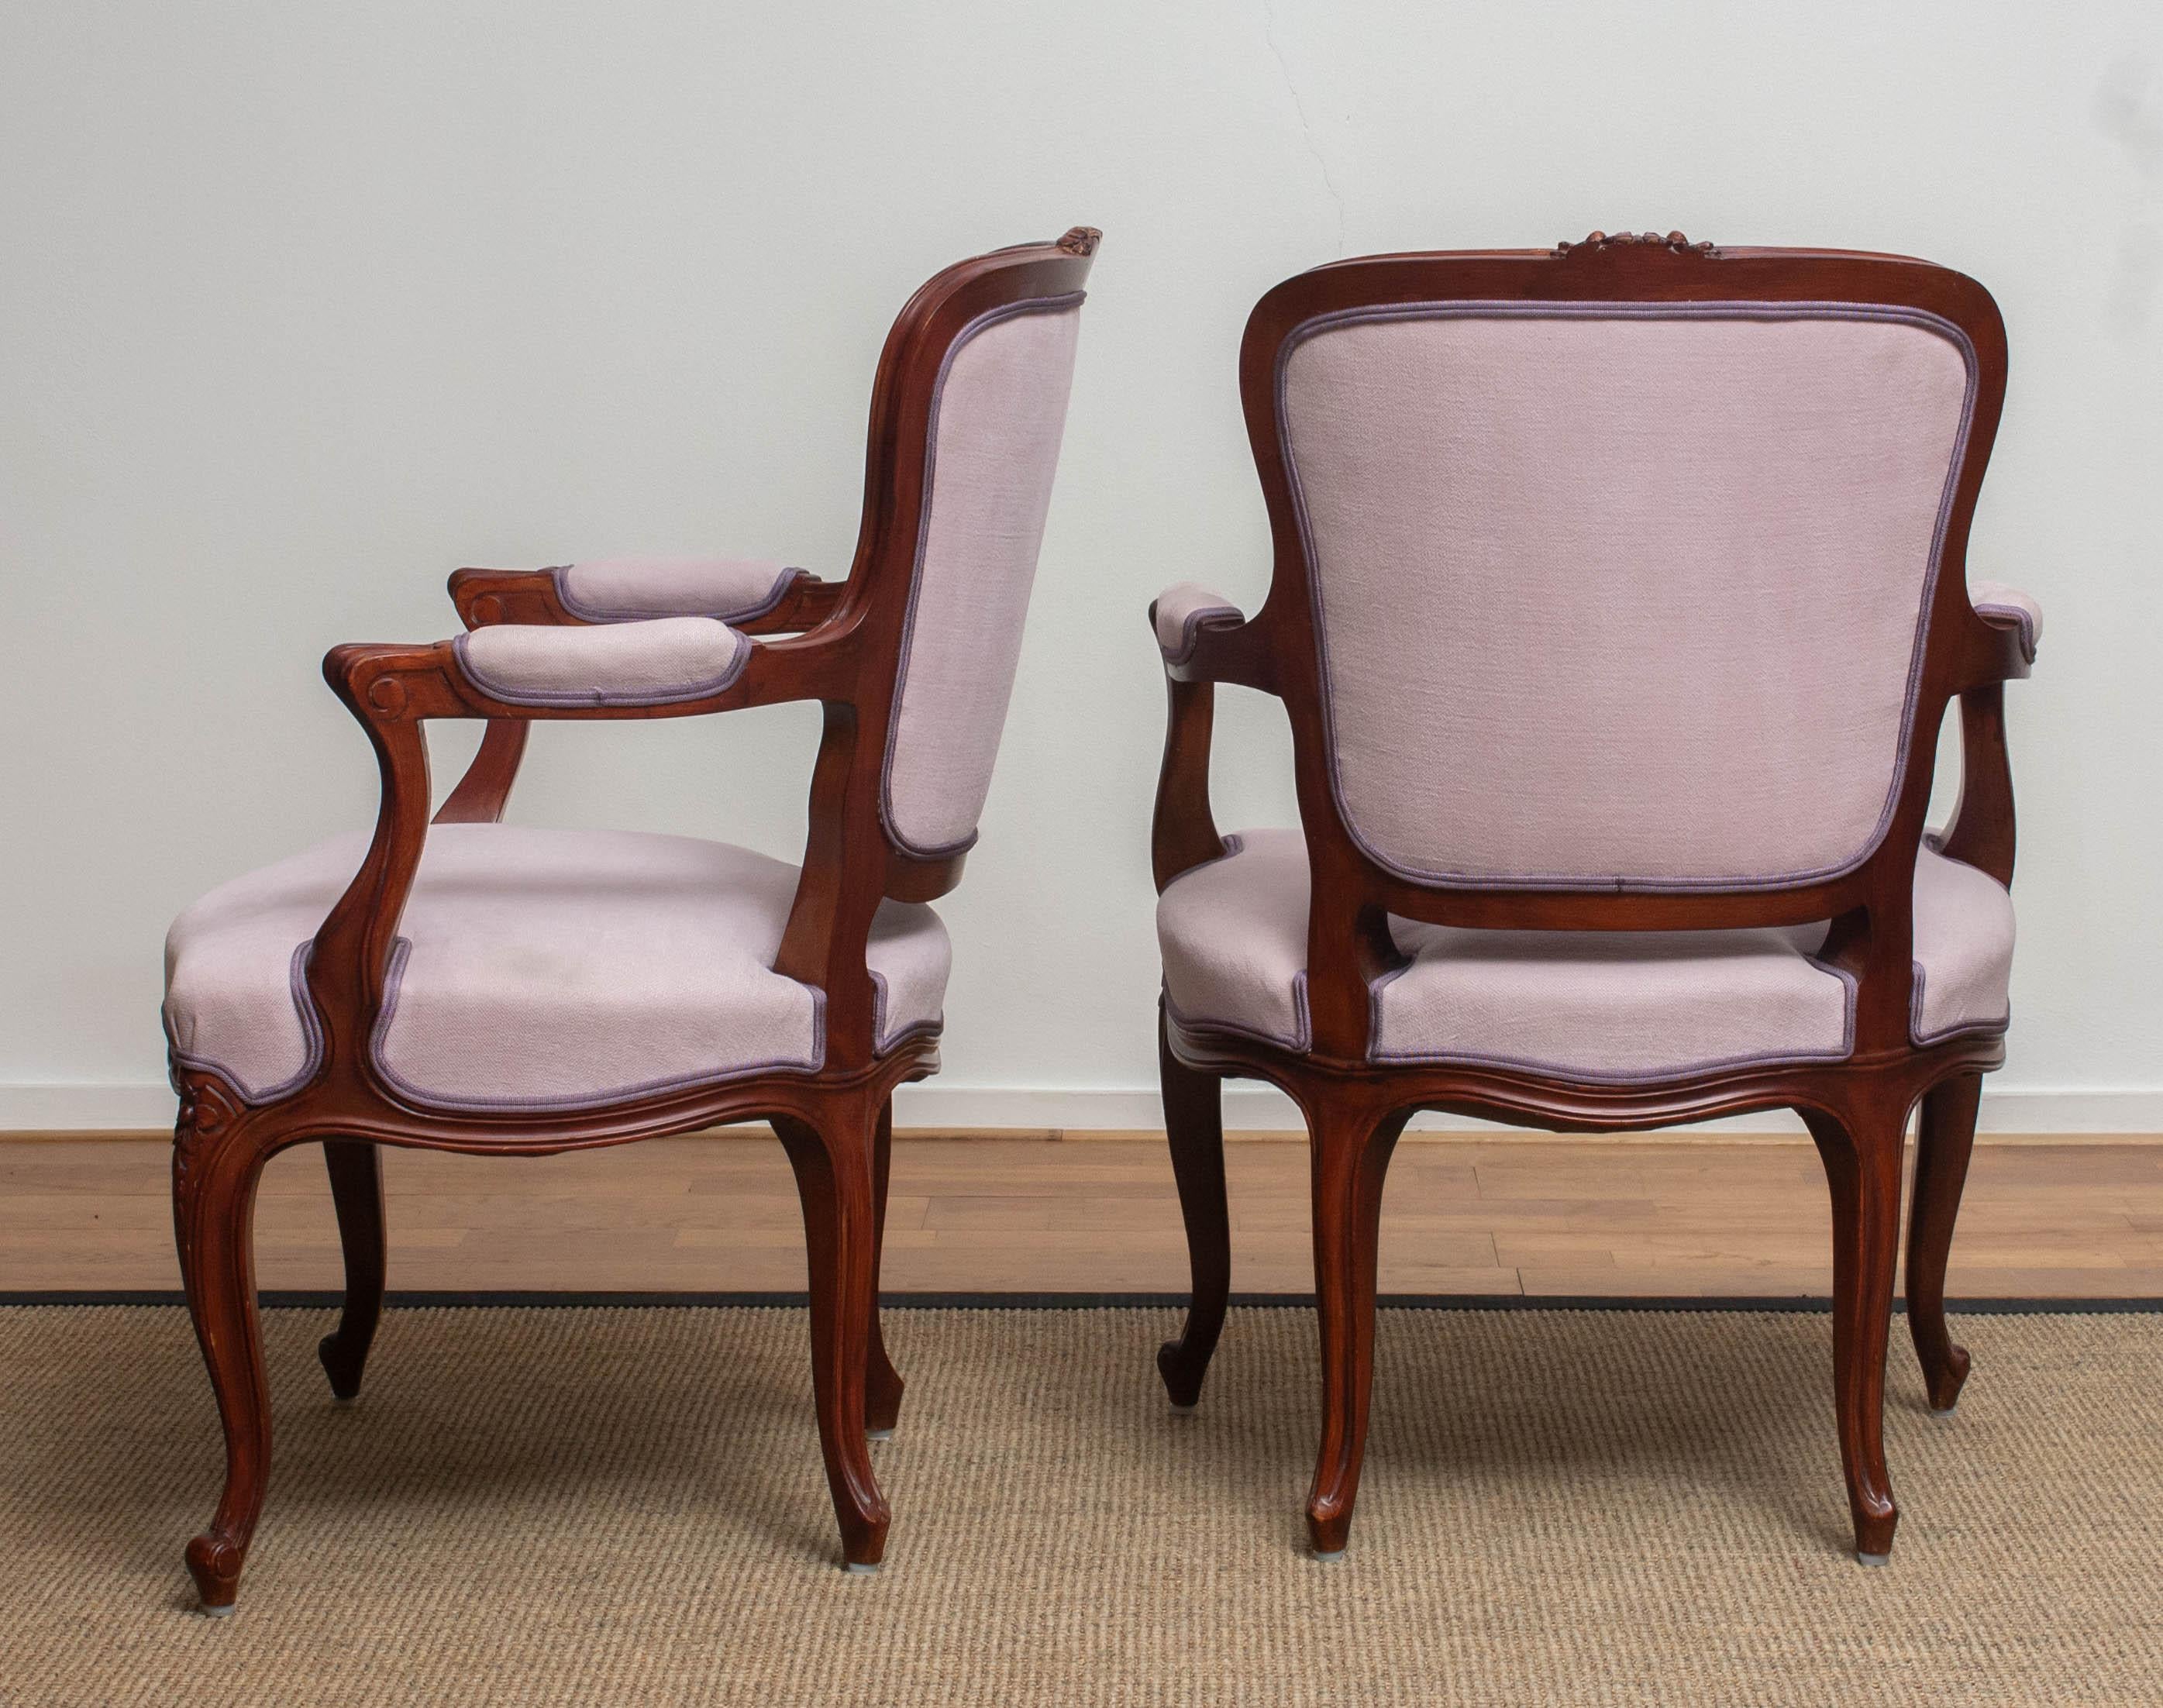 Fabric 1950s, Pair of Pink Swedish Rococo Bergères in the Shabby Chic Technique Chairs